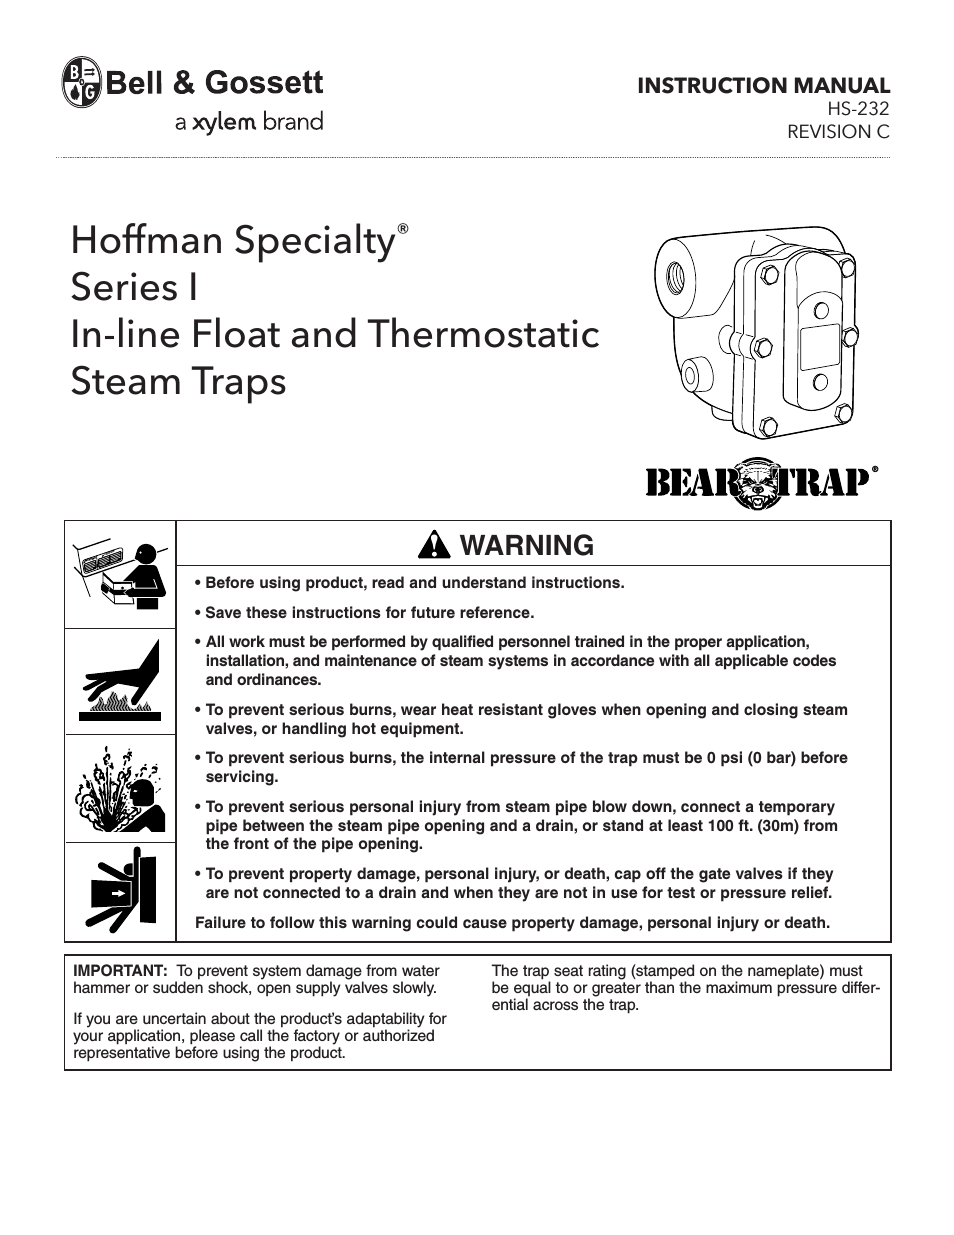 HS 232C Series I In-line Float and Thermostatic Steam Traps